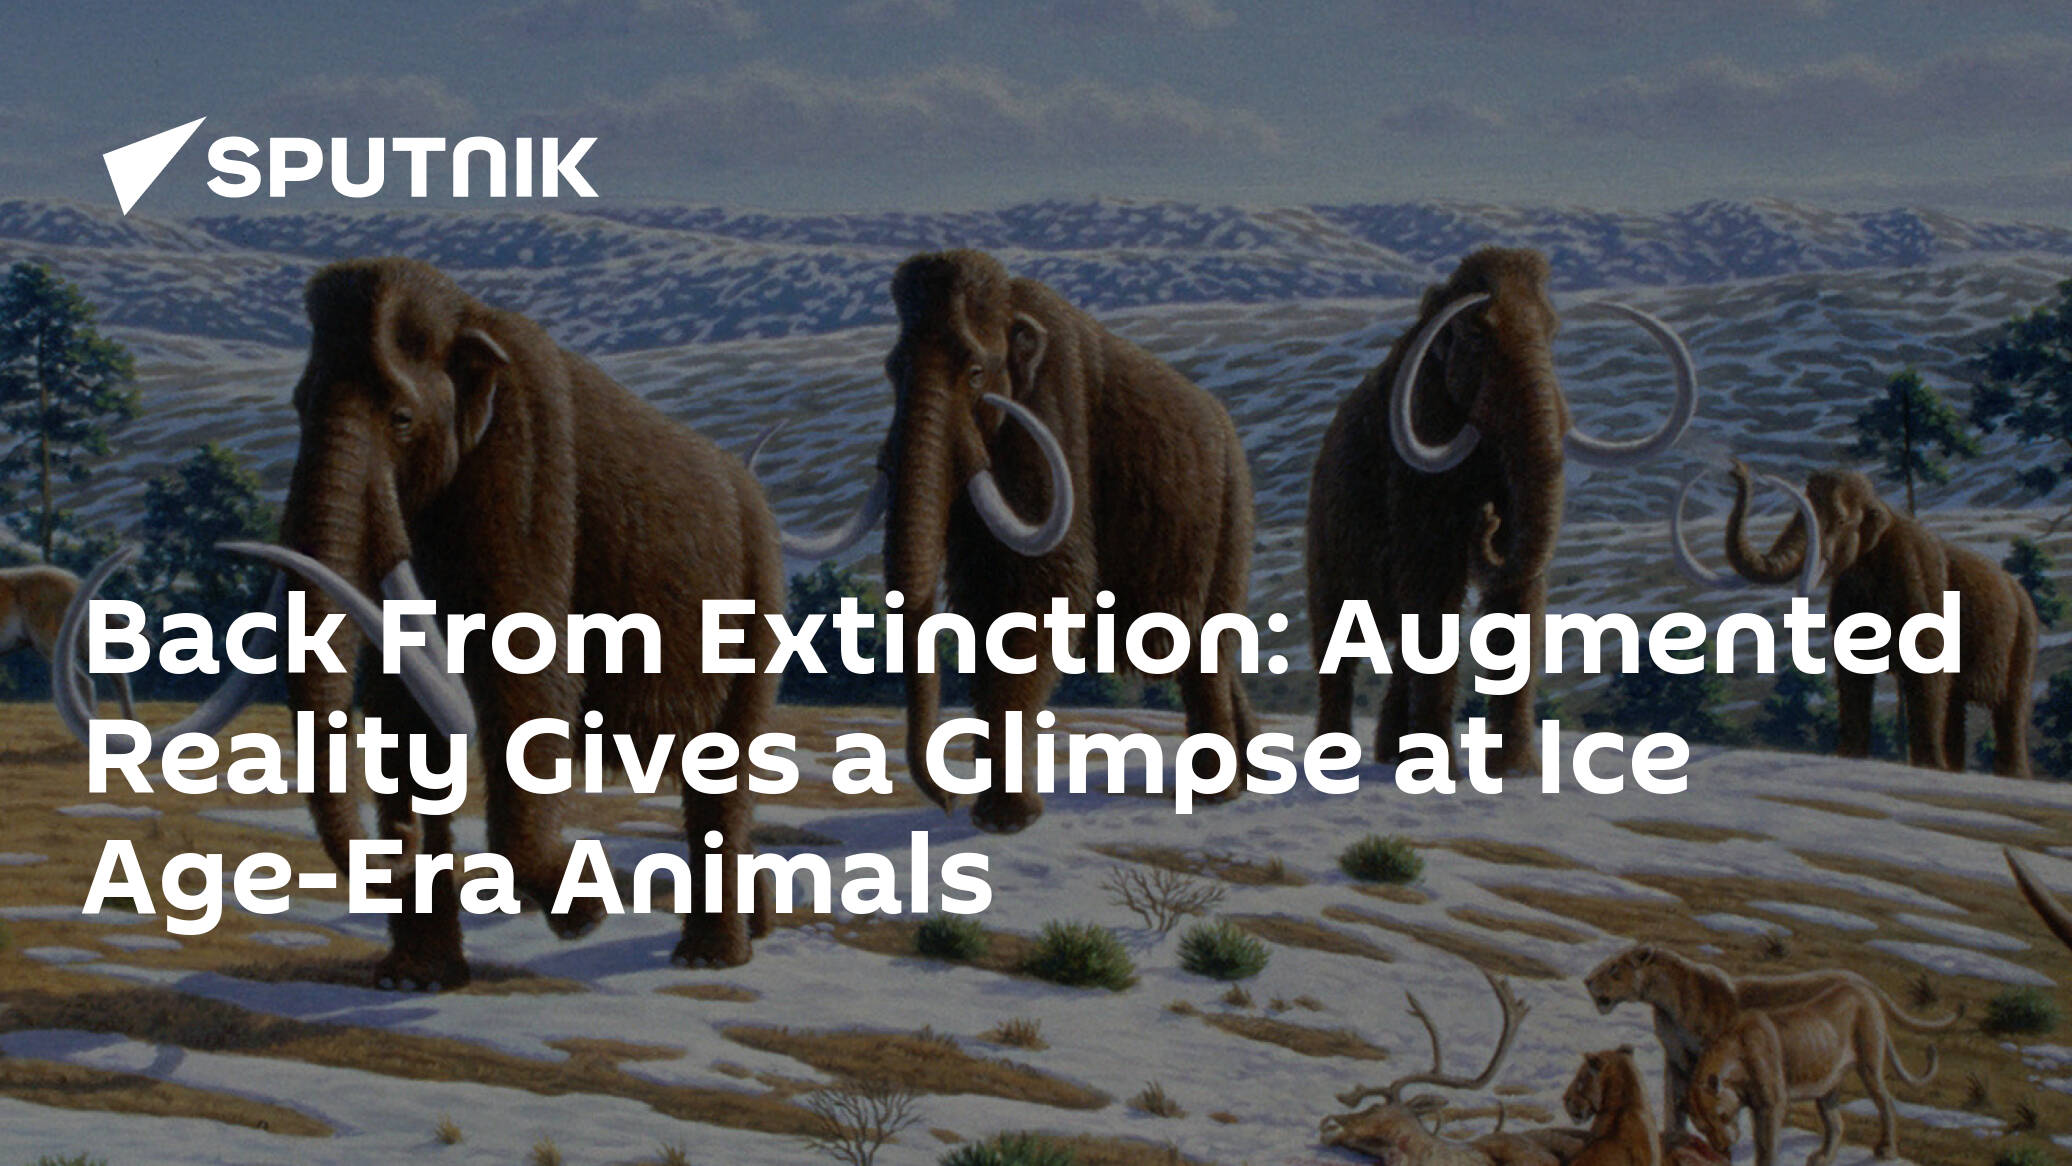 Back From Extinction: Augmented Reality Gives a Glimpse at Ice Age-Era Animals - 04.03.2022, Sputnik International